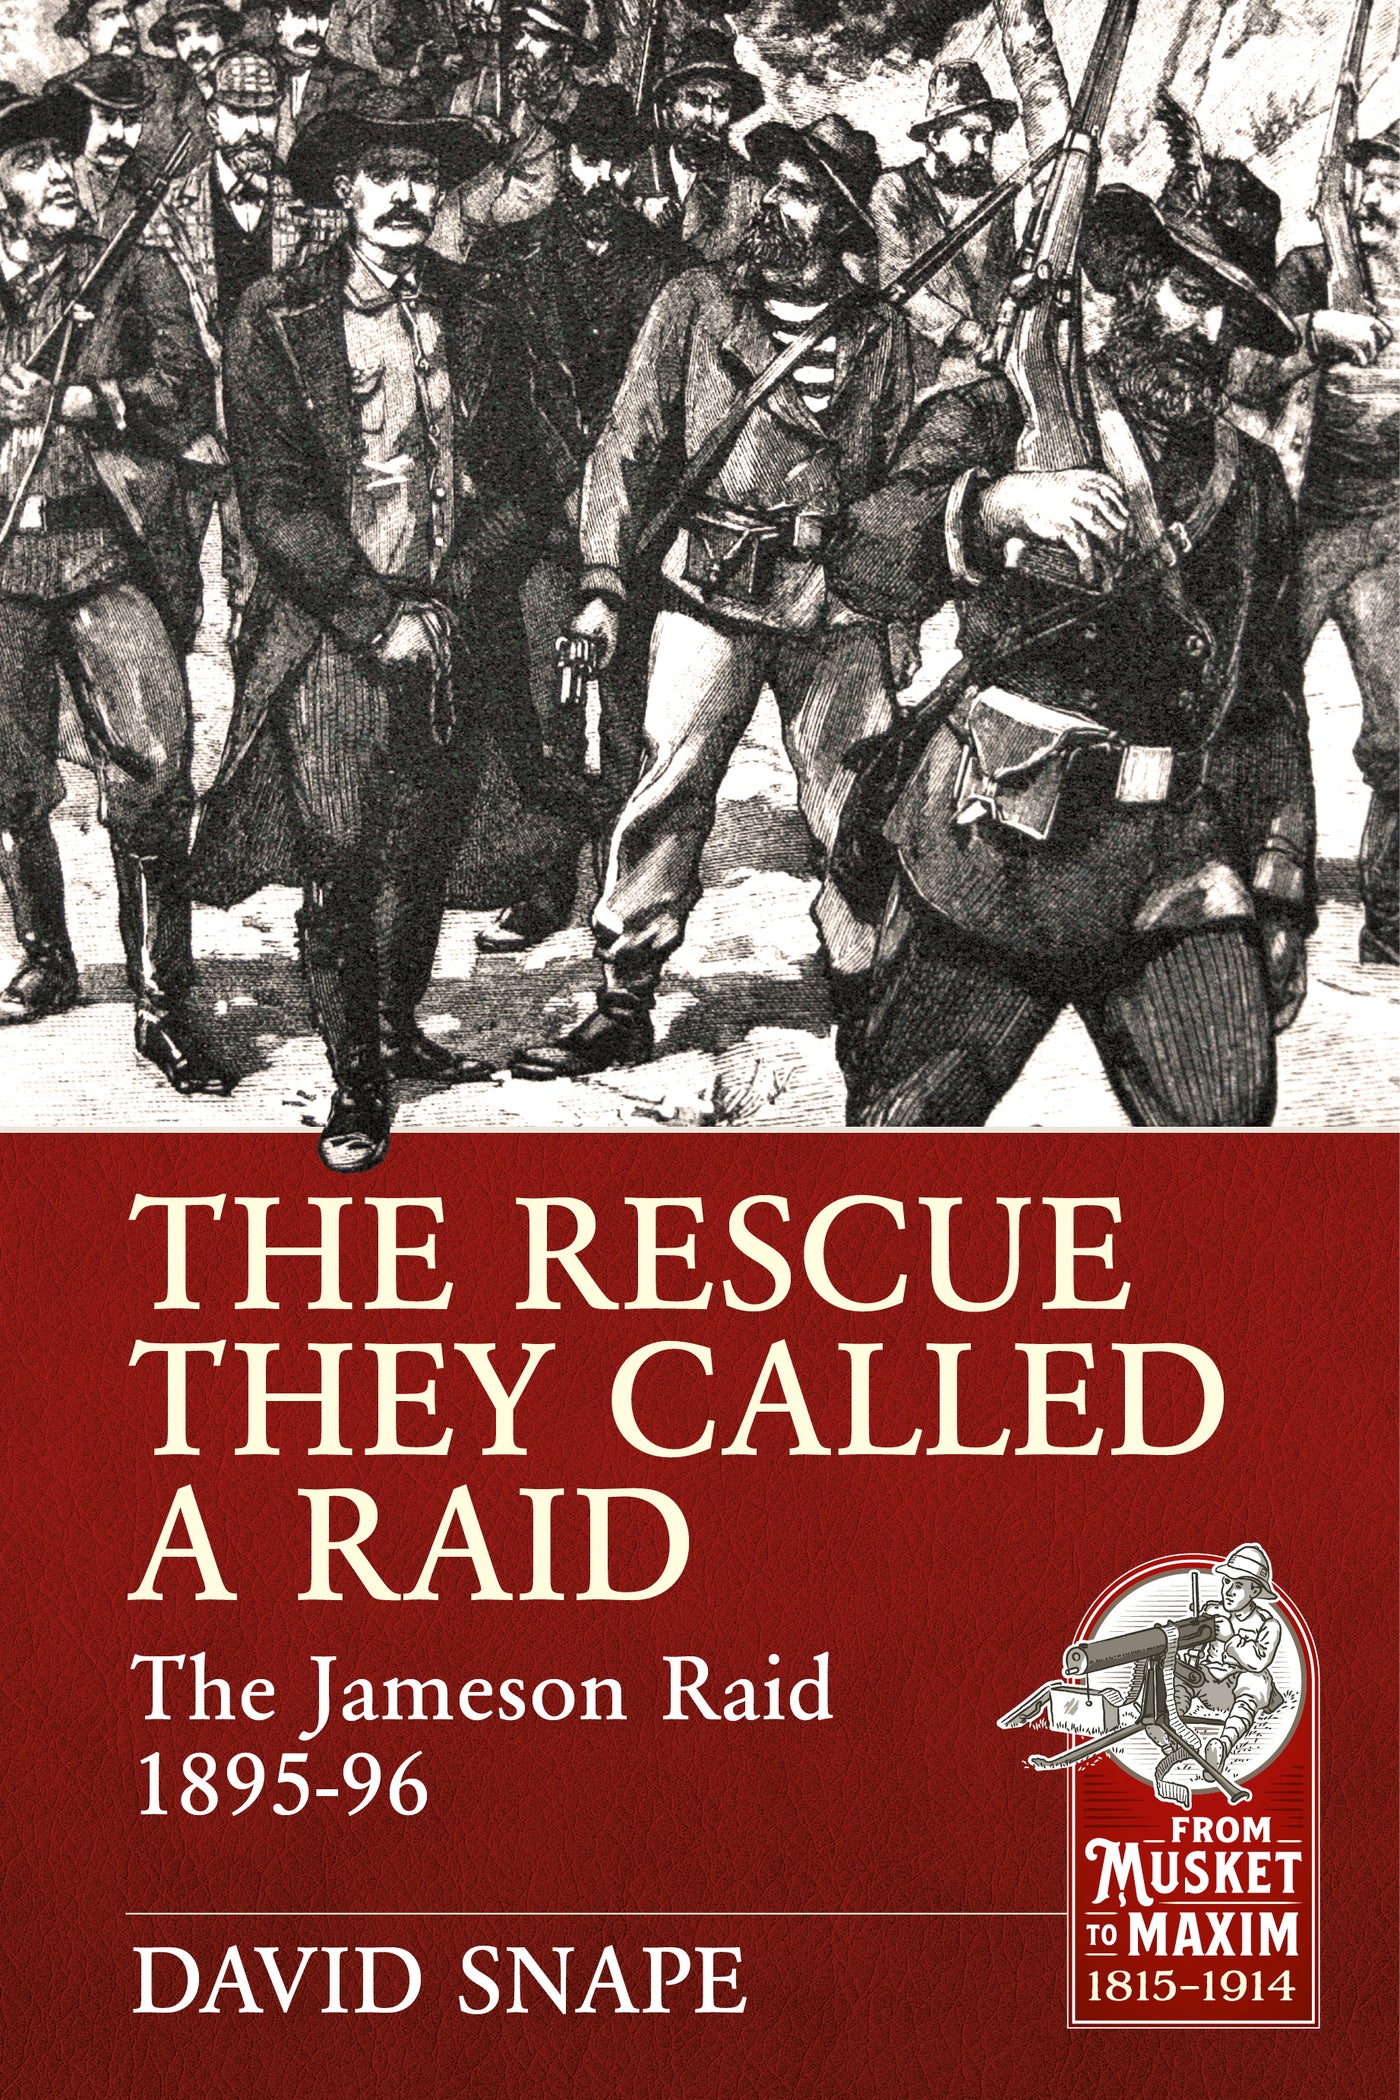 The Rescue They Called a Raid